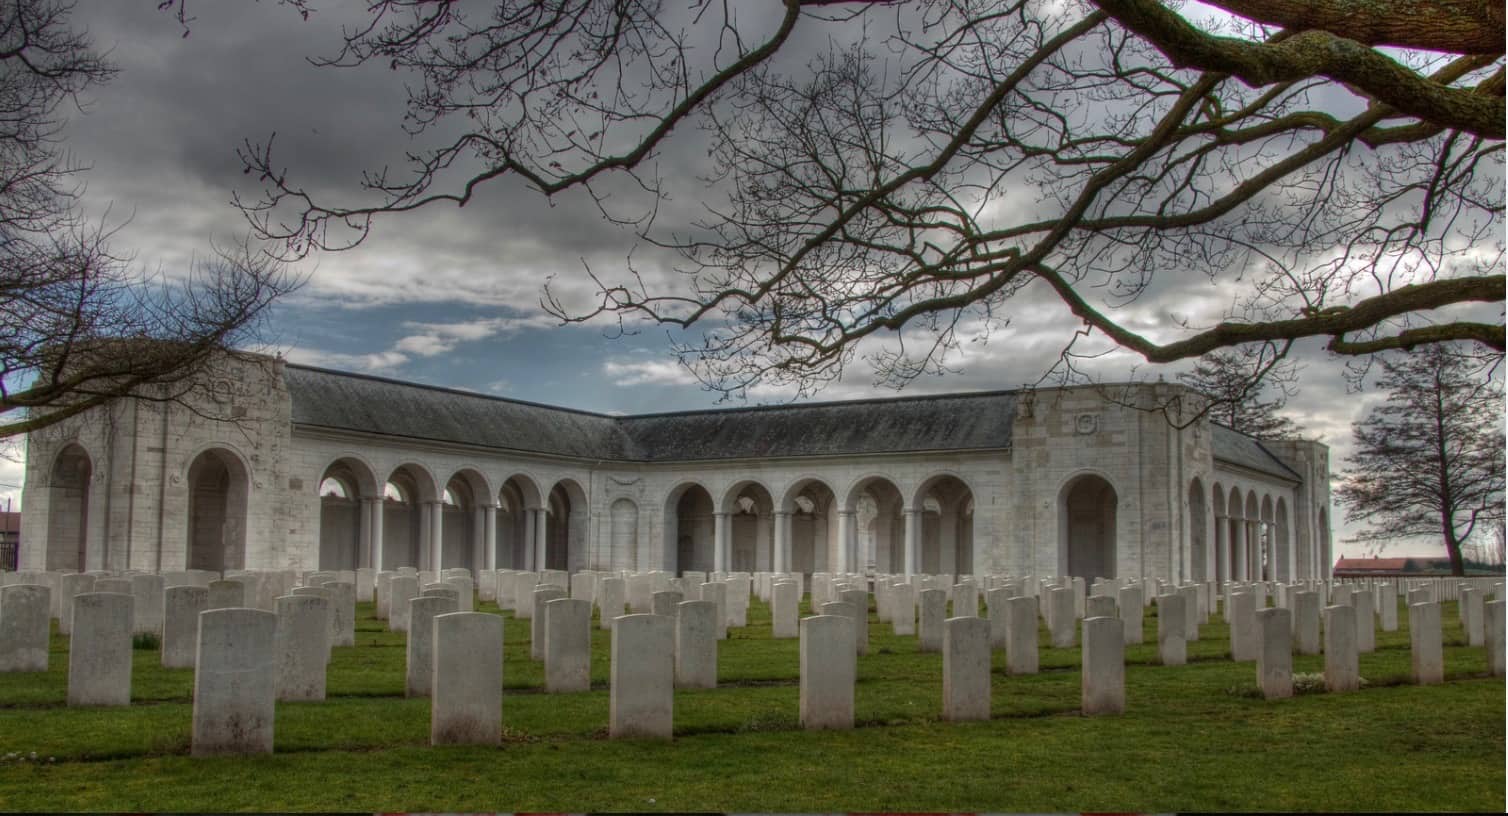 Le Touret Memorial Soldiers of Dorking and the